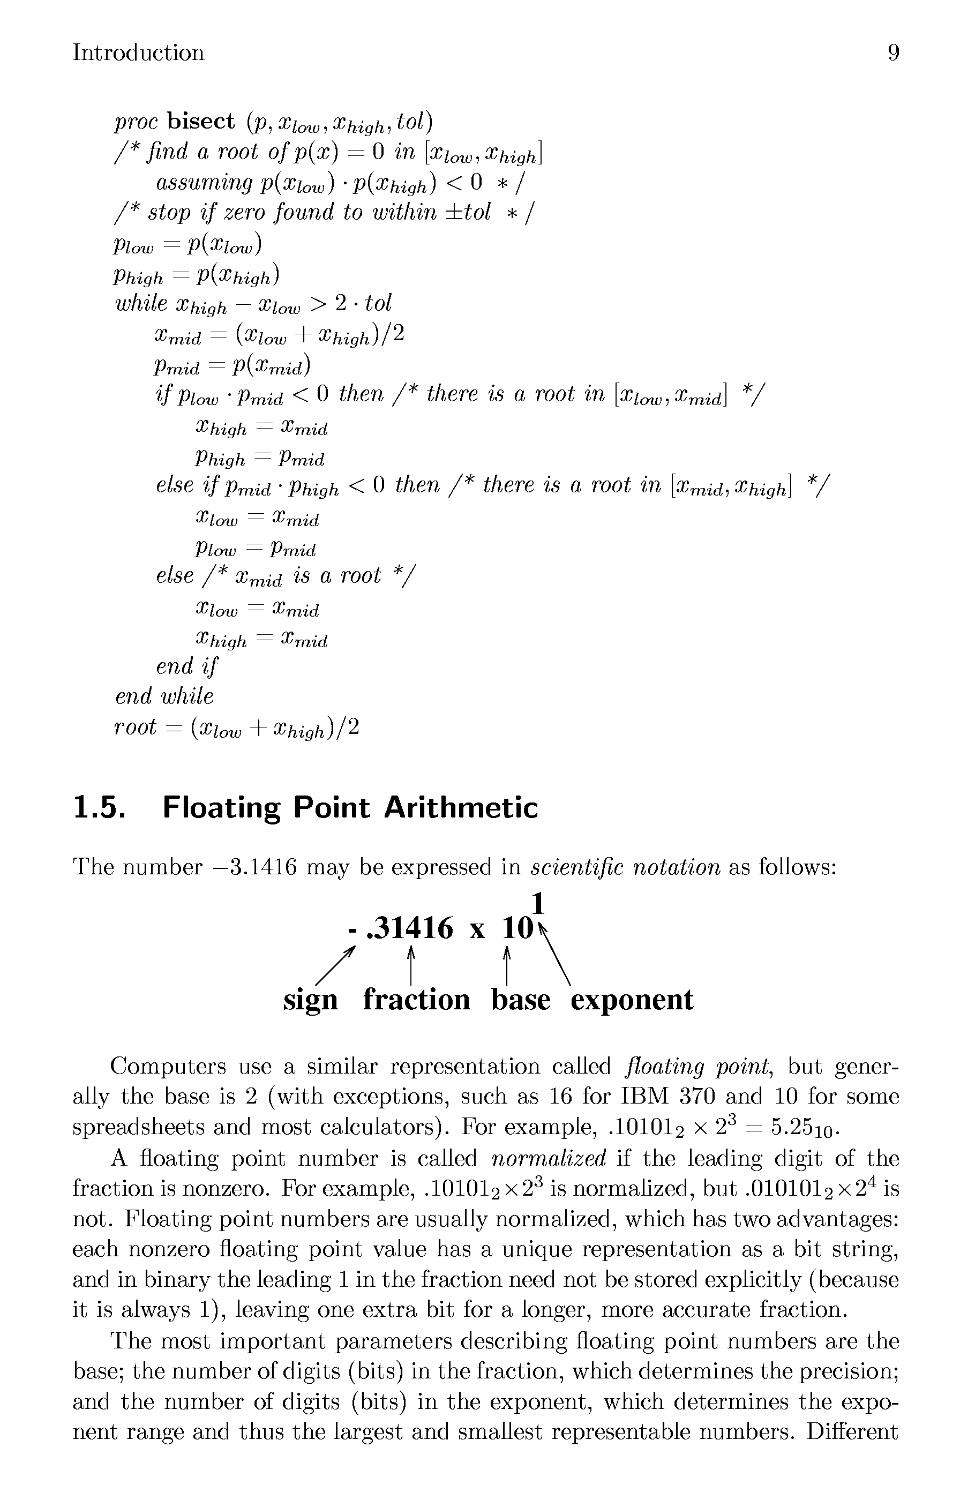 1.5 Floating Point Arithmetic